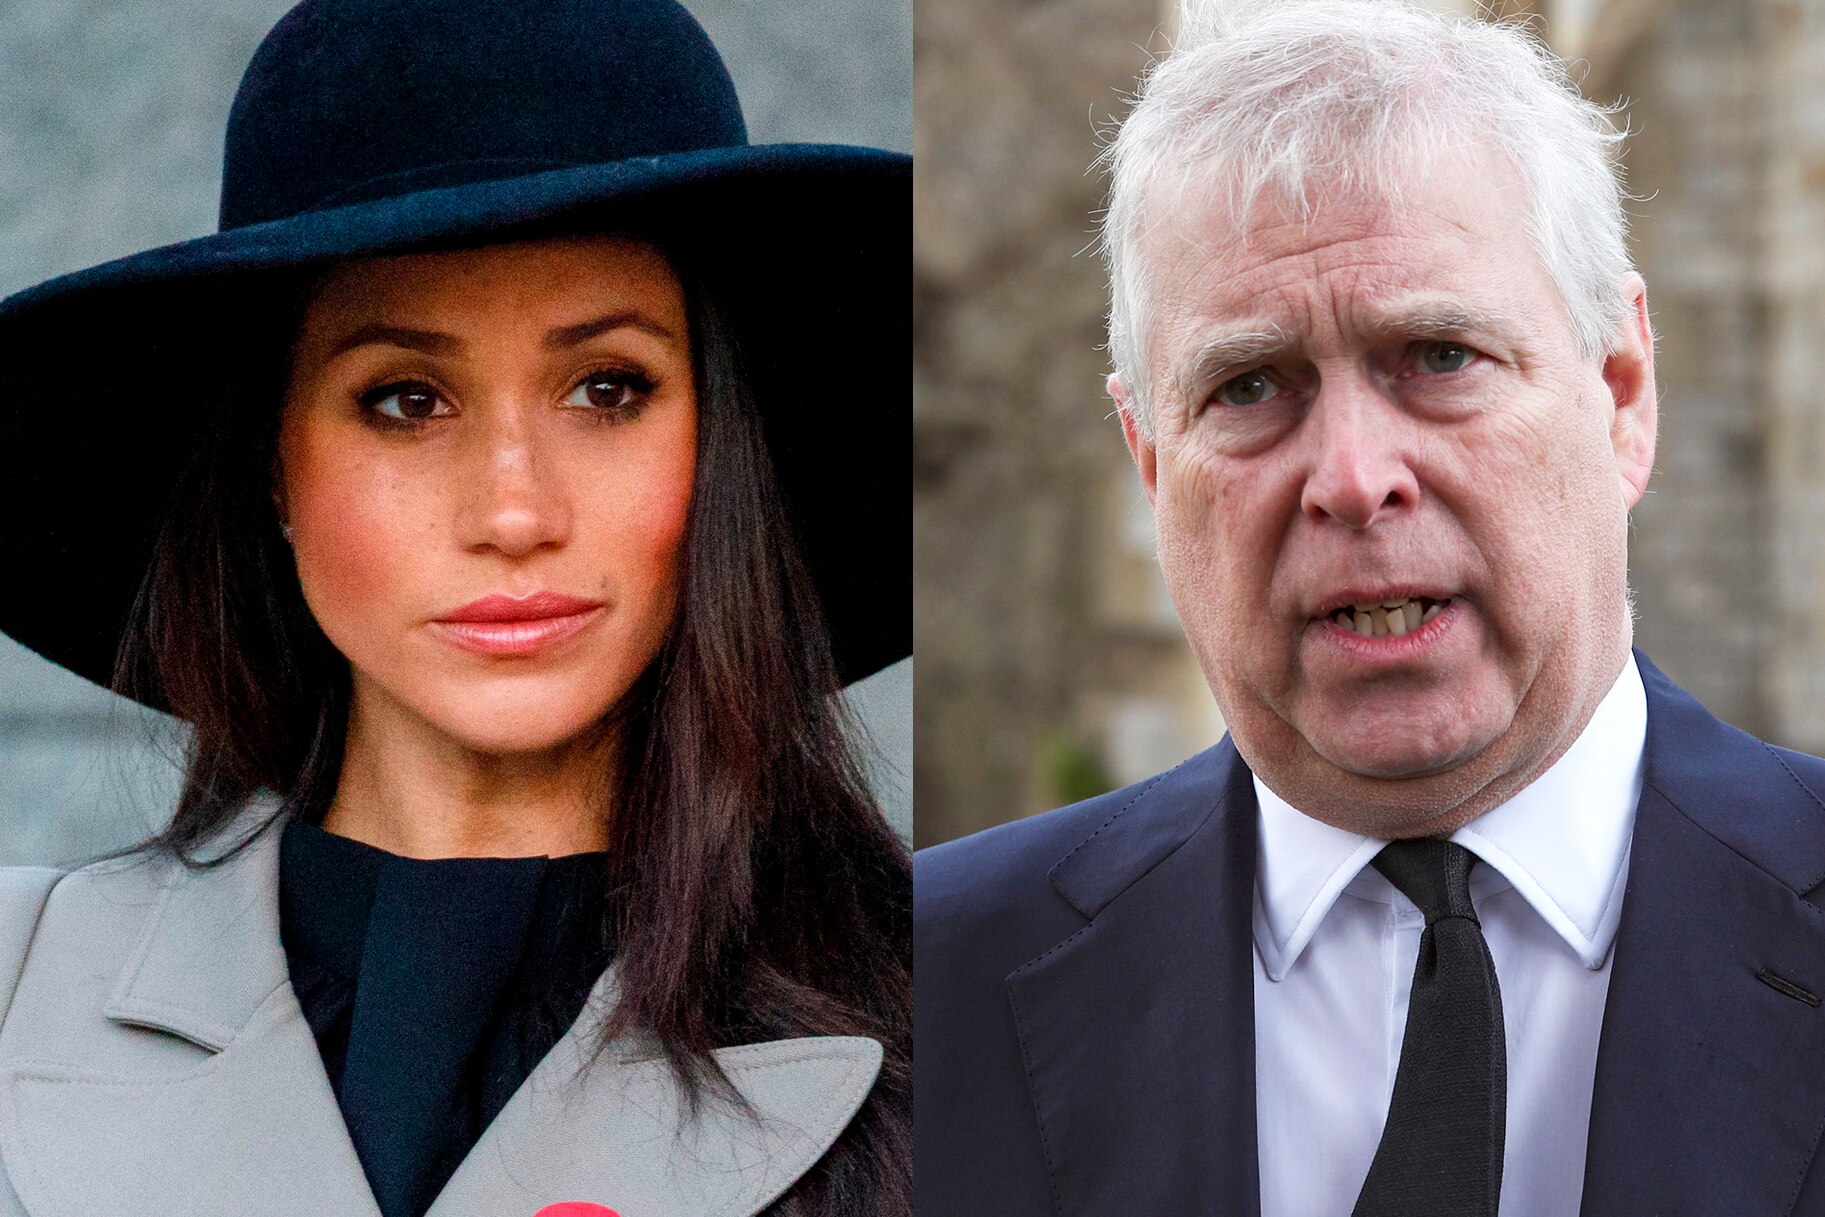 Andrew tate on meghan markle